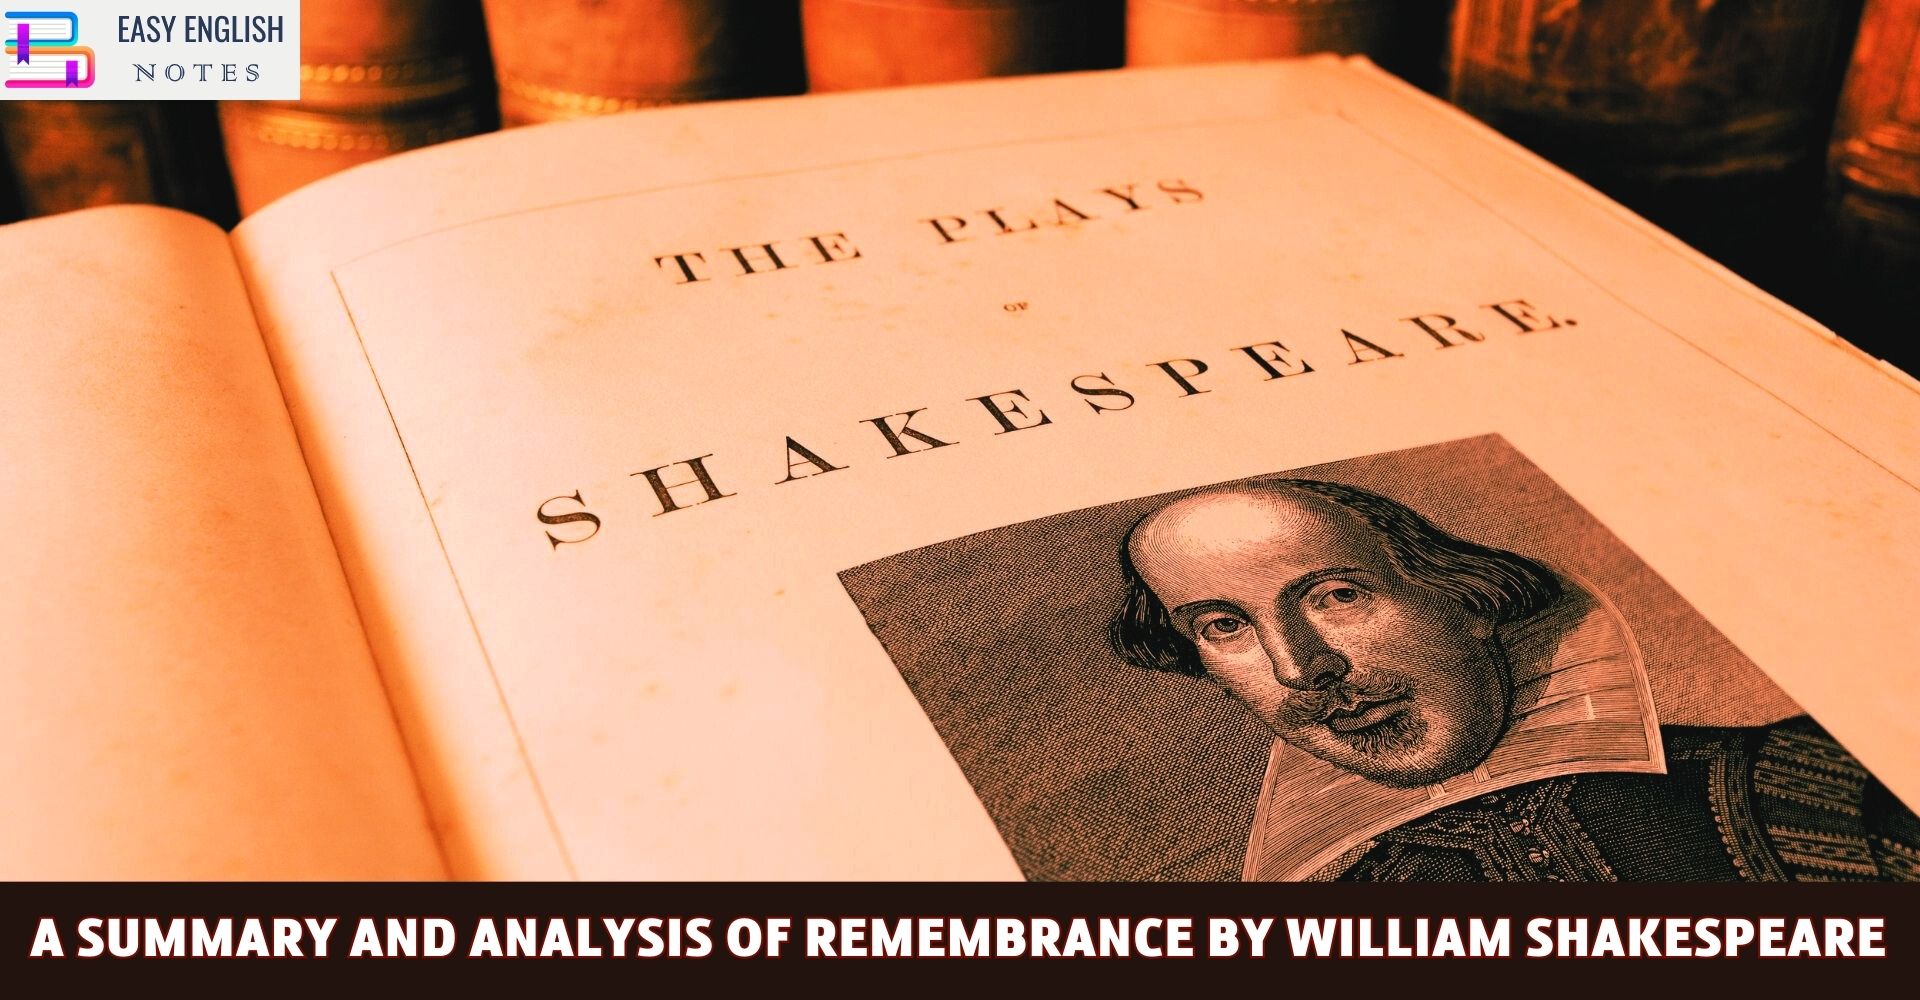 A Summary and Analysis of Remembrance by William Shakespeare